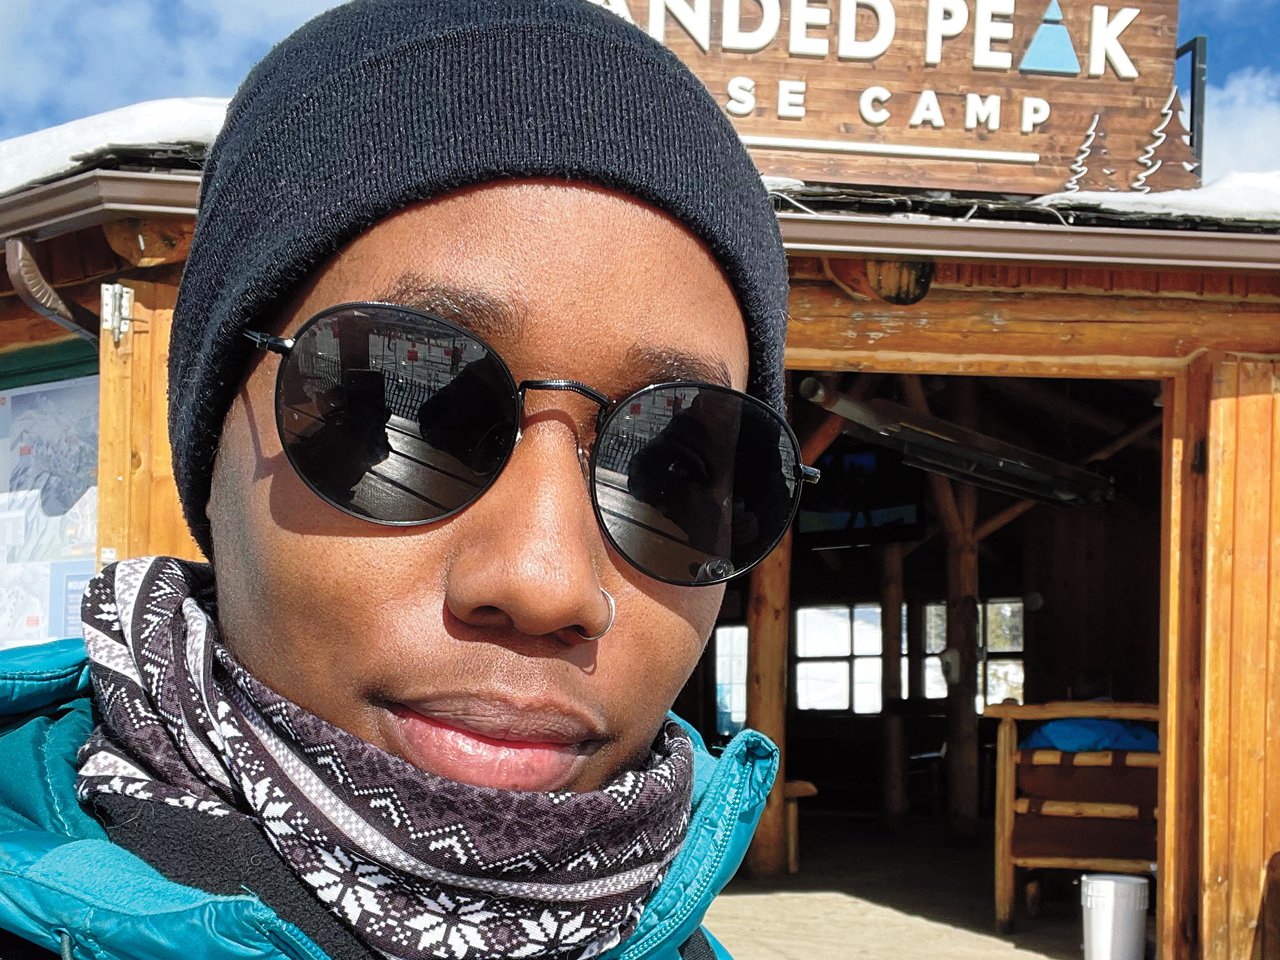 A photo of a Black woman in a black tuque and turquoise ski jacket in front of a ski chalet